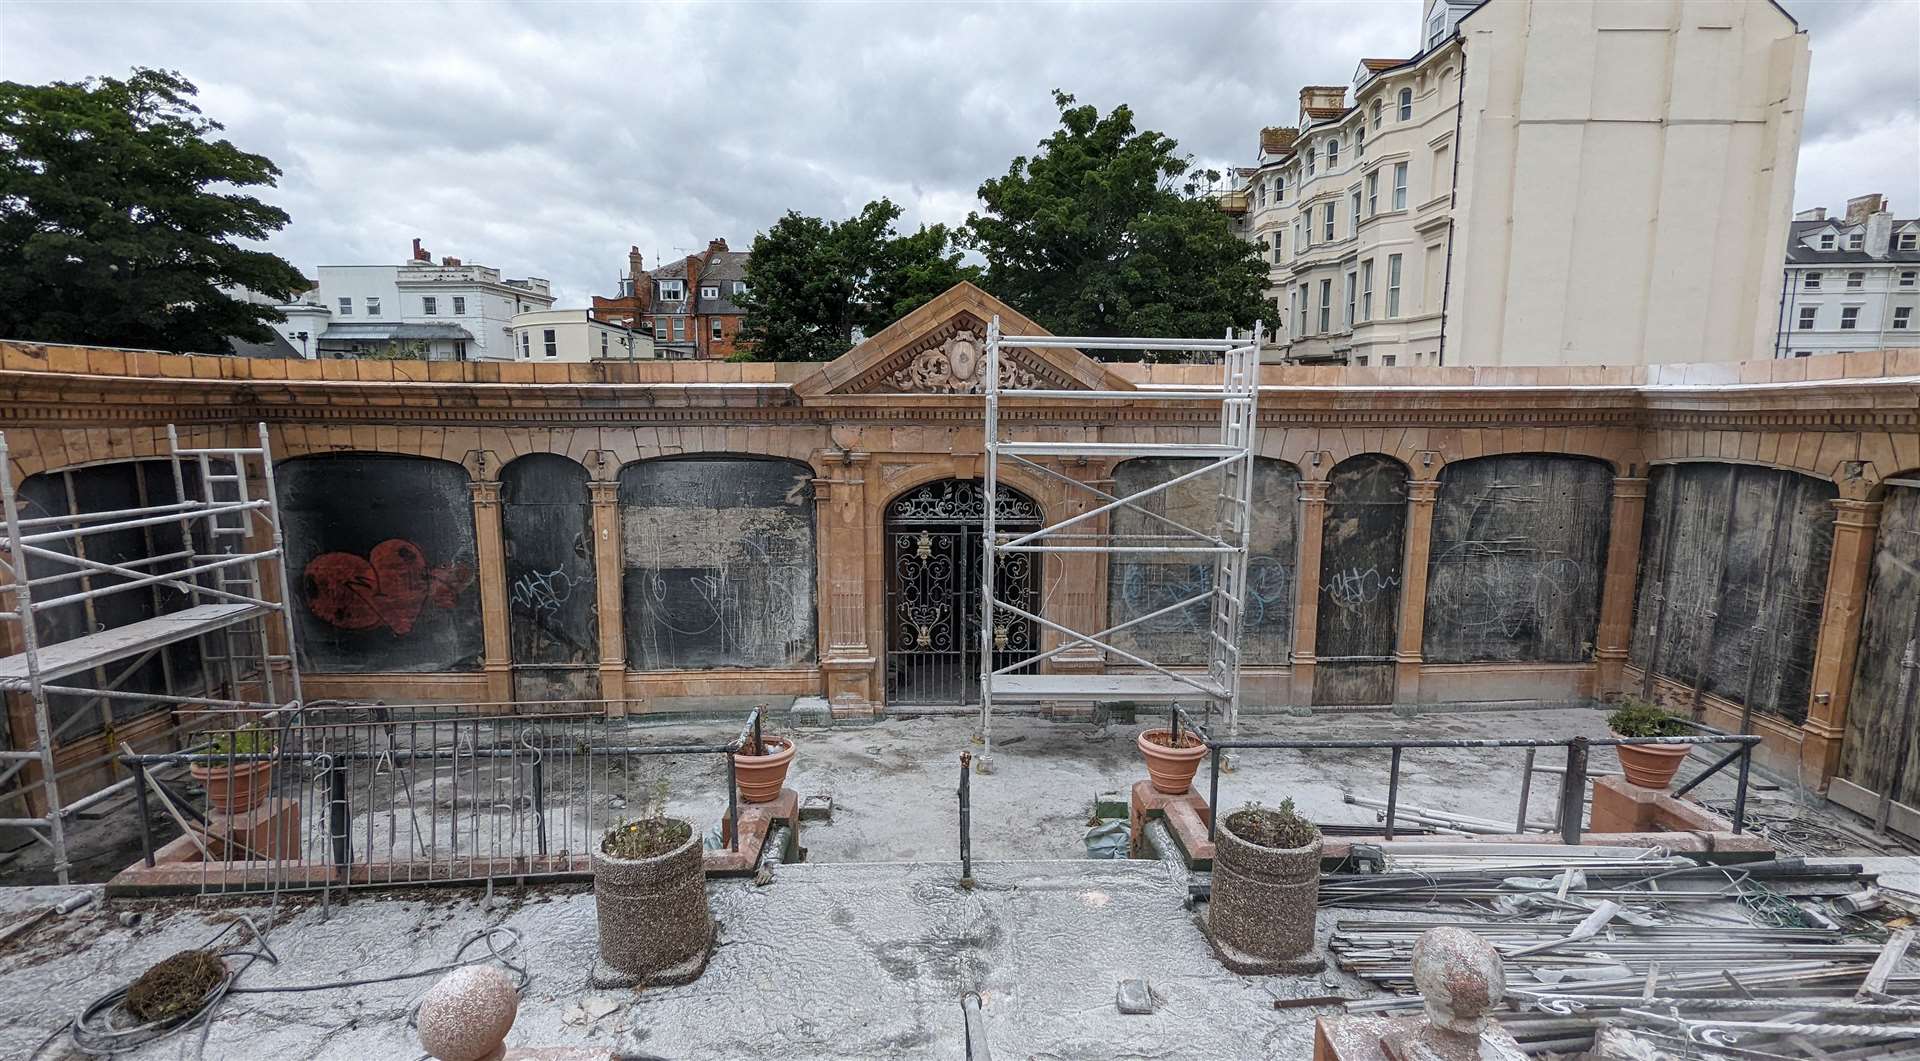 Work is taking place to save and restore the facade of the Pavilion